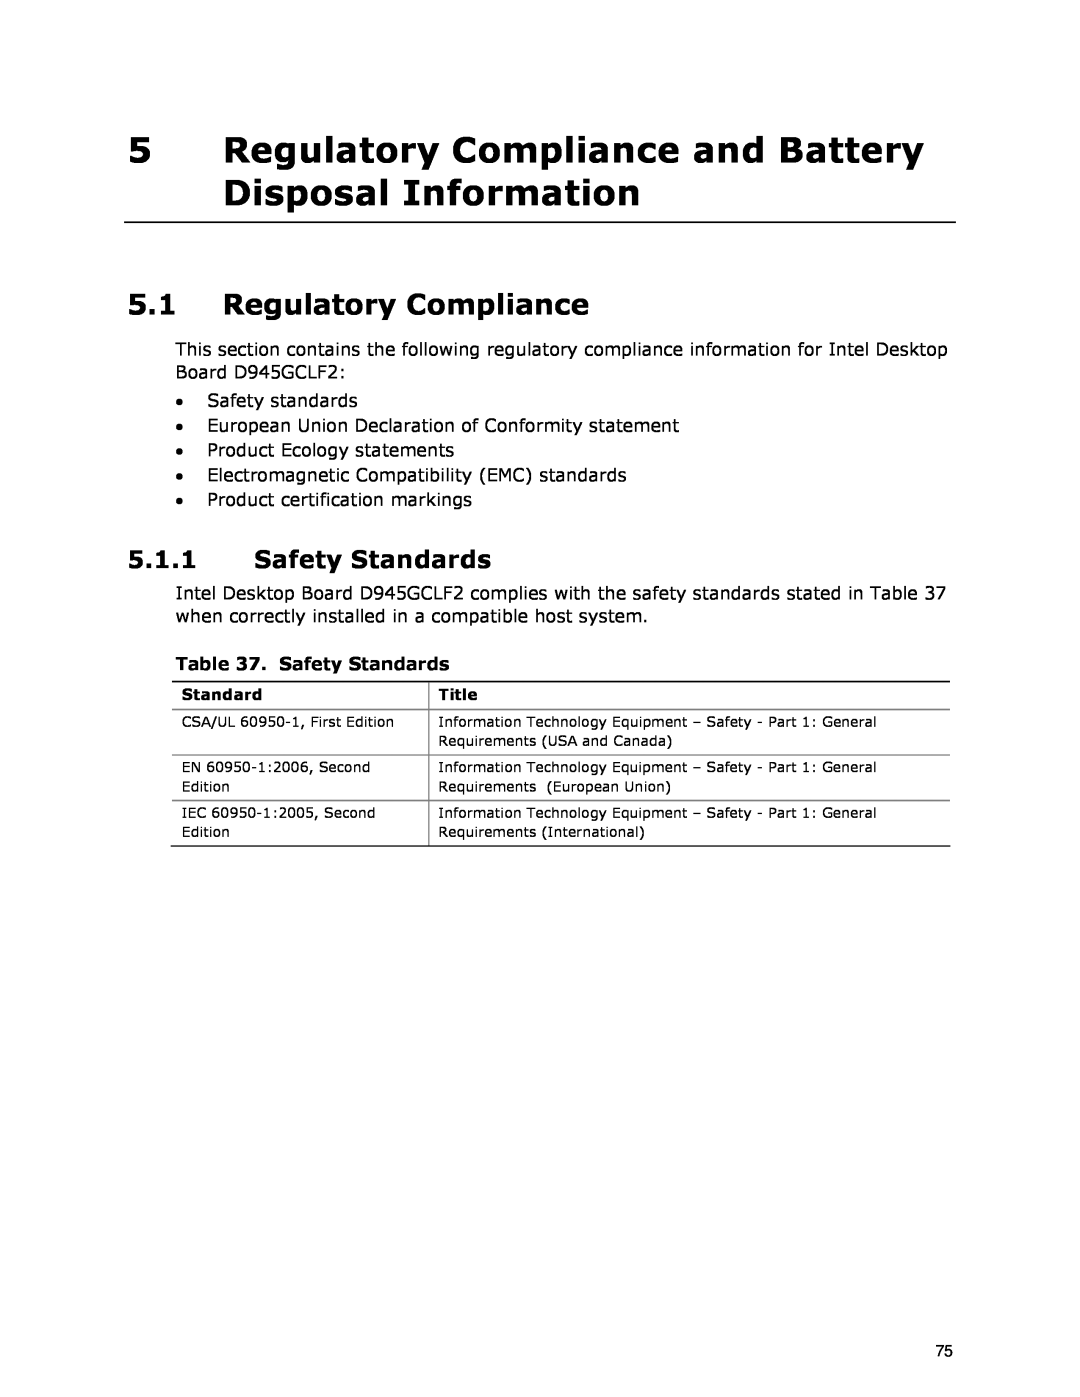 Intel D945GCLF2 specifications Regulatory Compliance and Battery Disposal Information, Safety Standards 